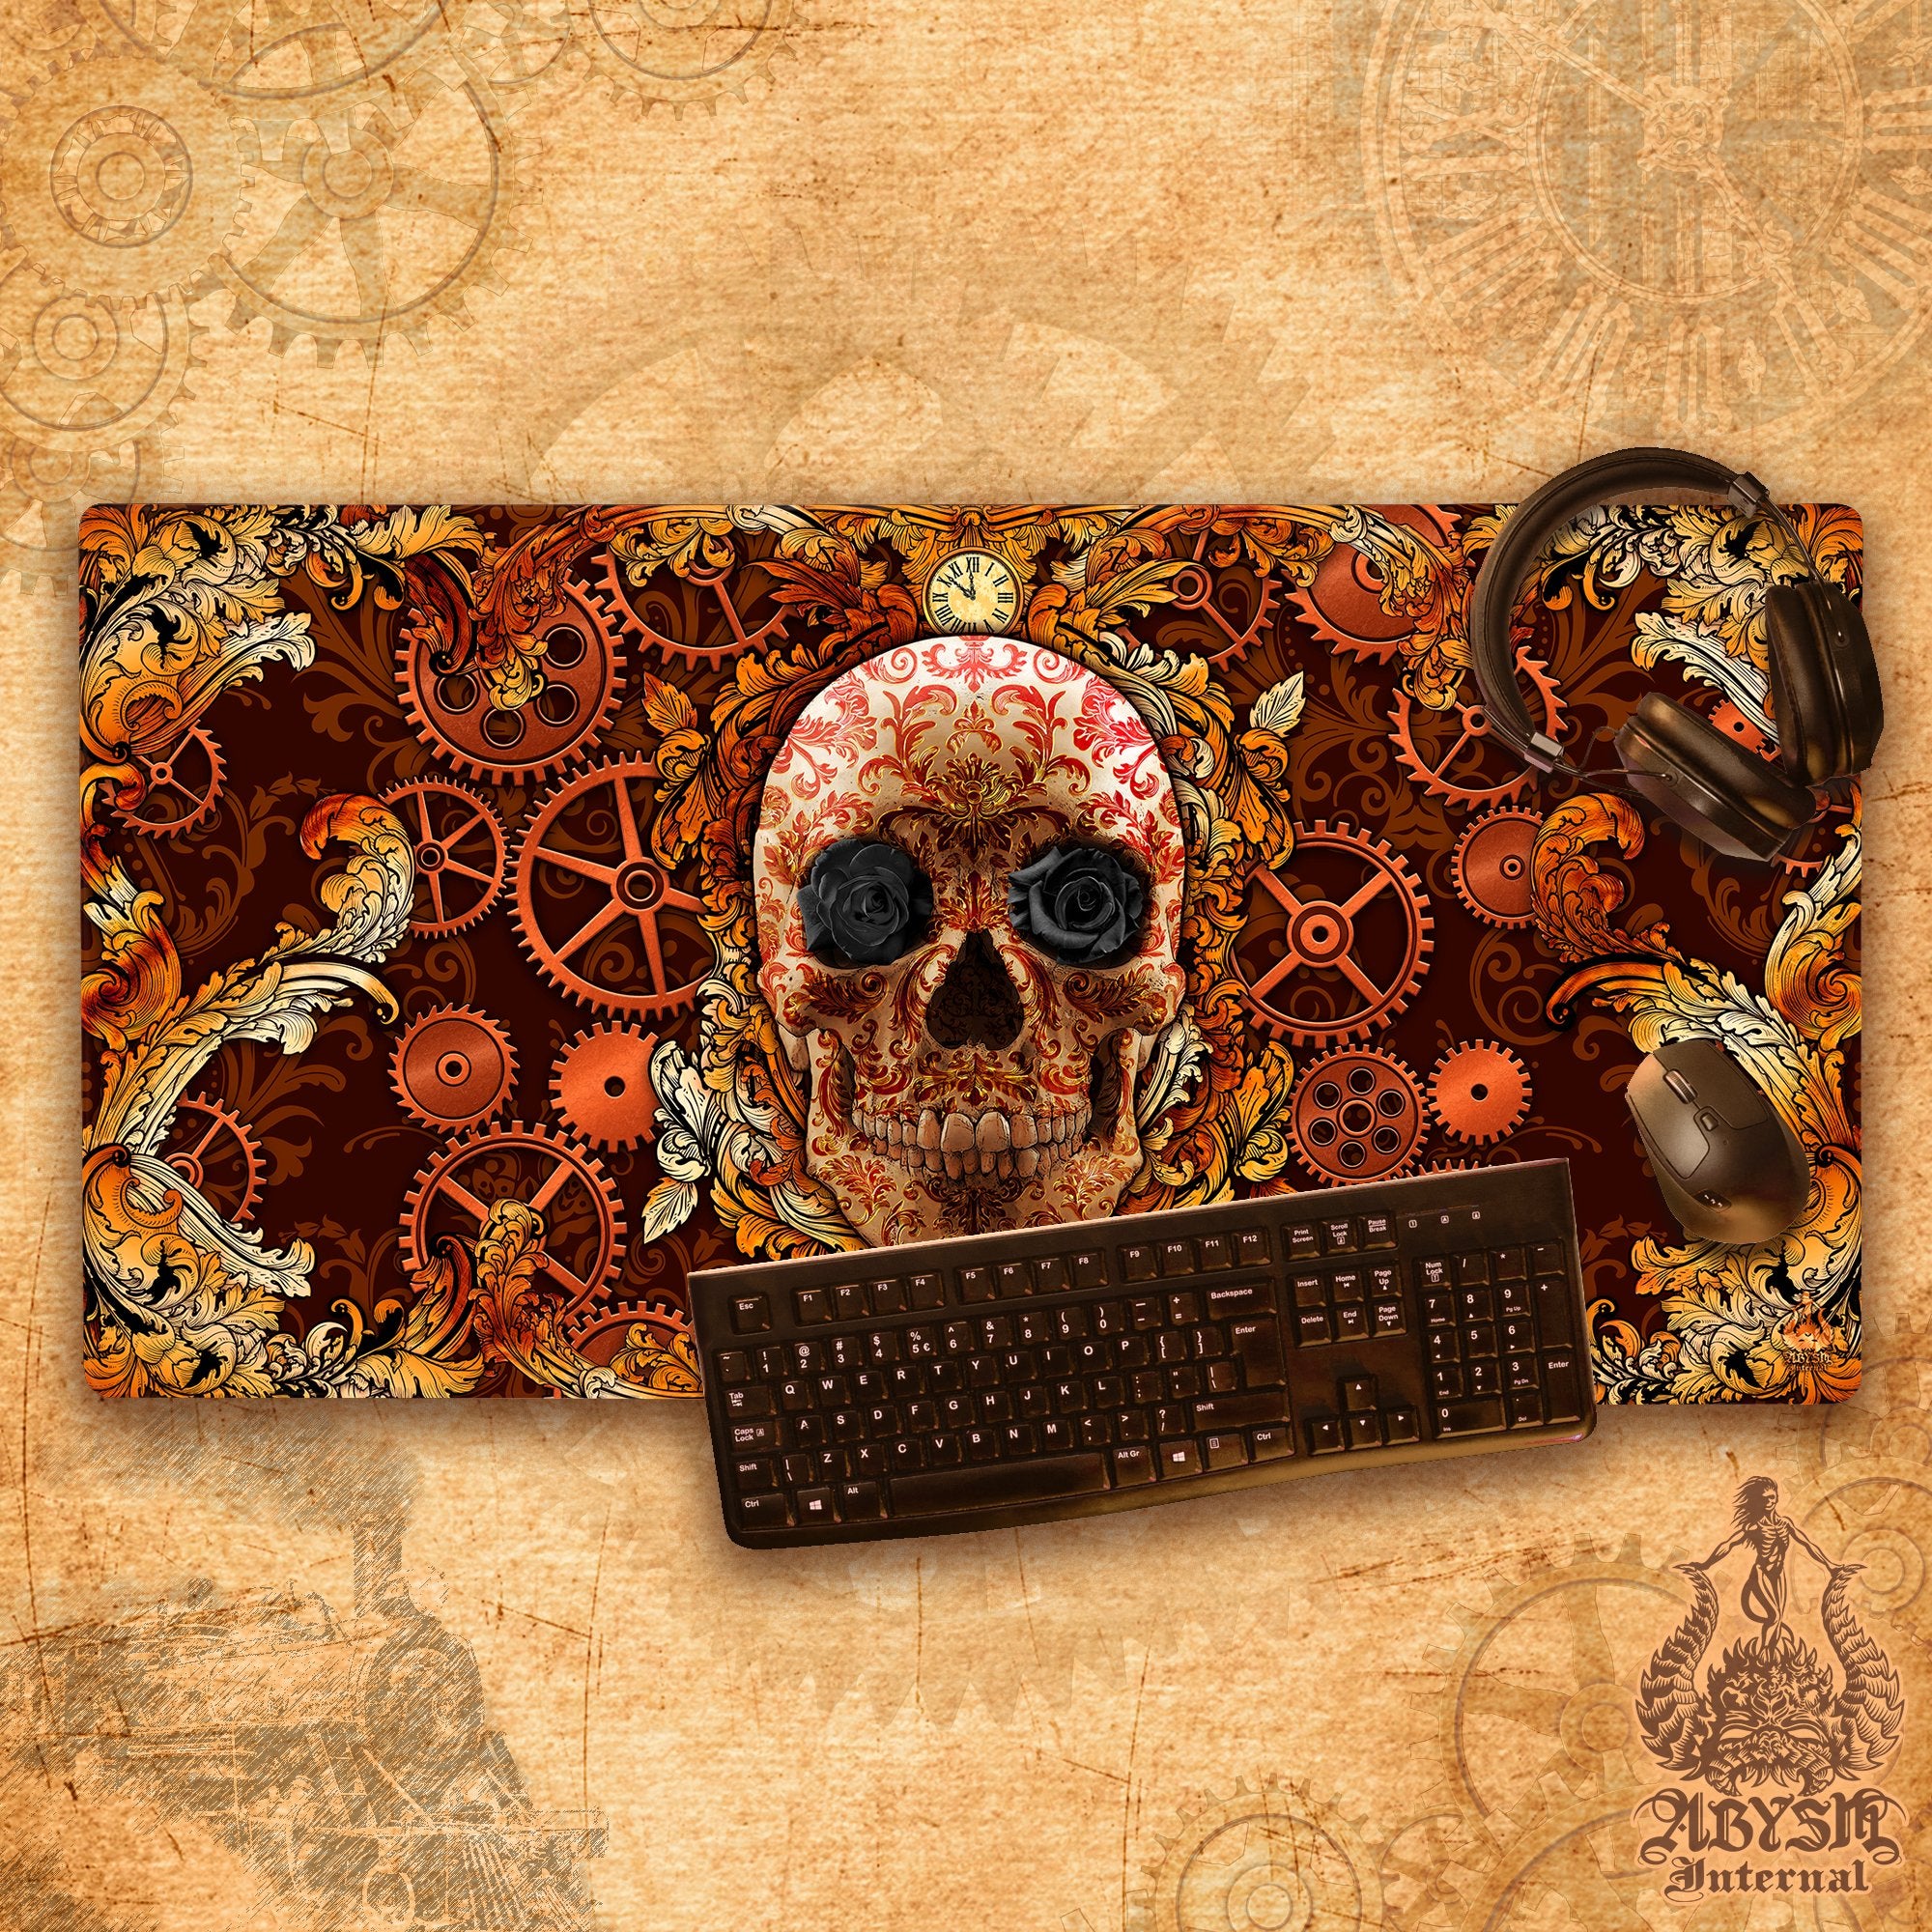 Steampunk Gaming Mouse Pad, Skull Desk Mat, Ornamented Table Protector Cover, Gears Workpad, Baroque Art Print - Abysm Internal